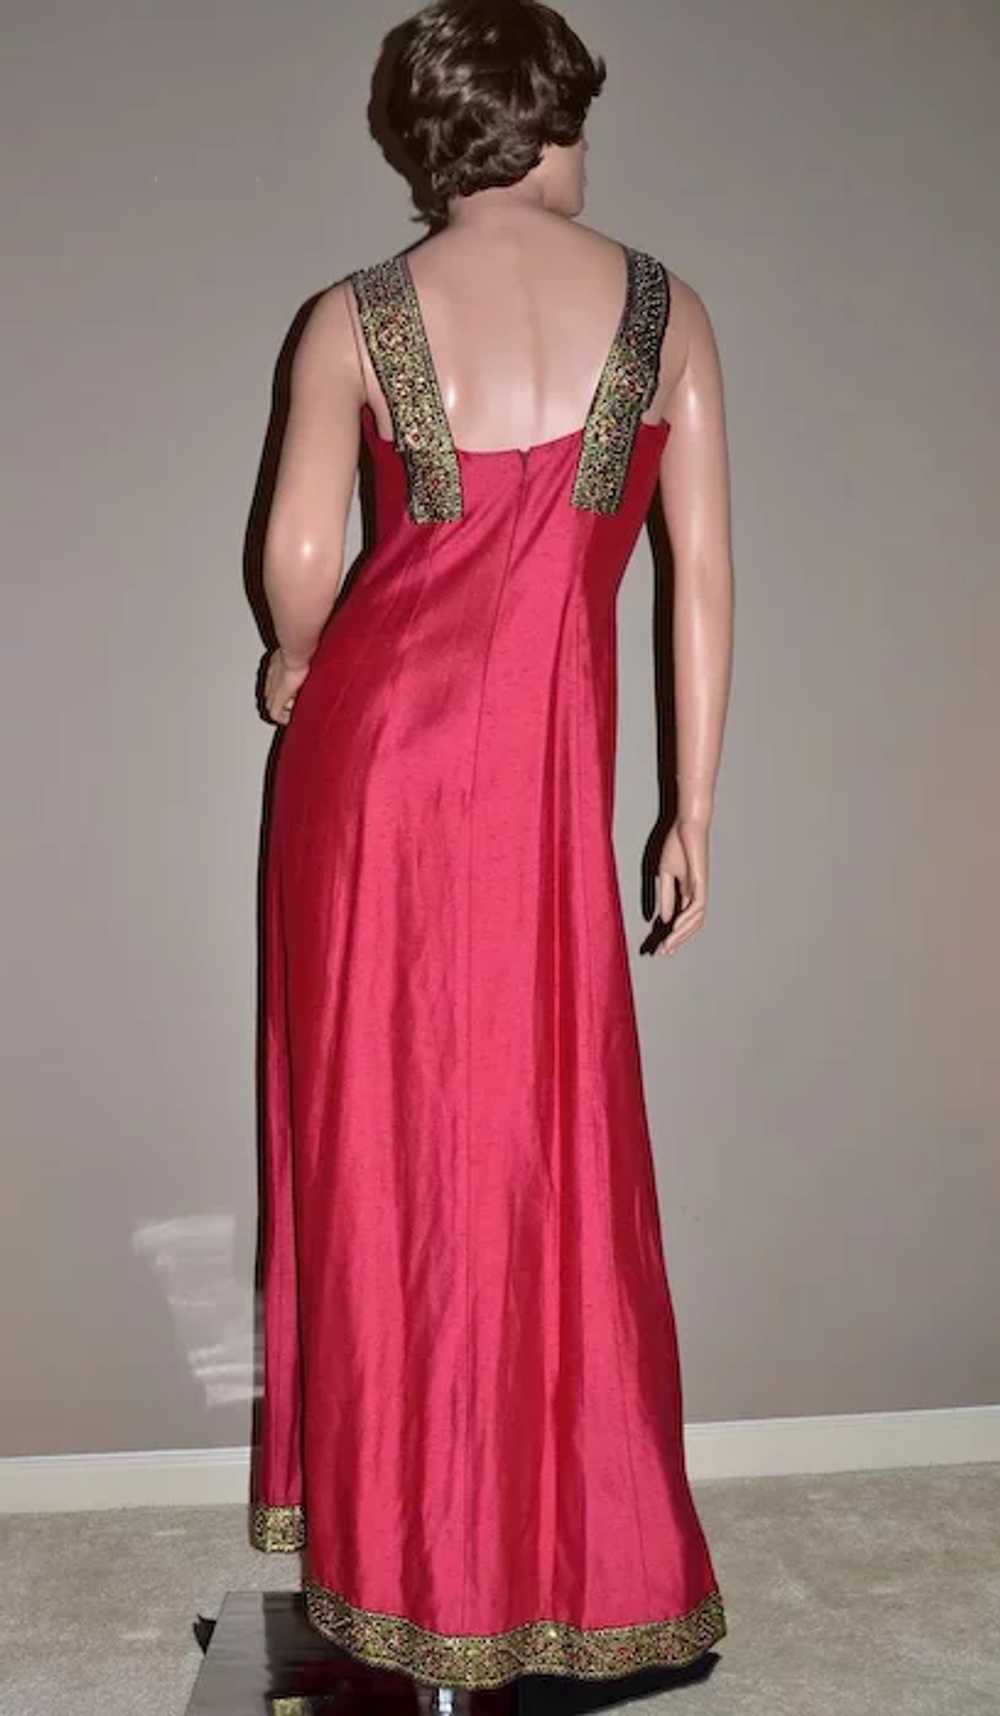 Bianchi Designer Ornate Christmas Red Maxi Gown - image 5